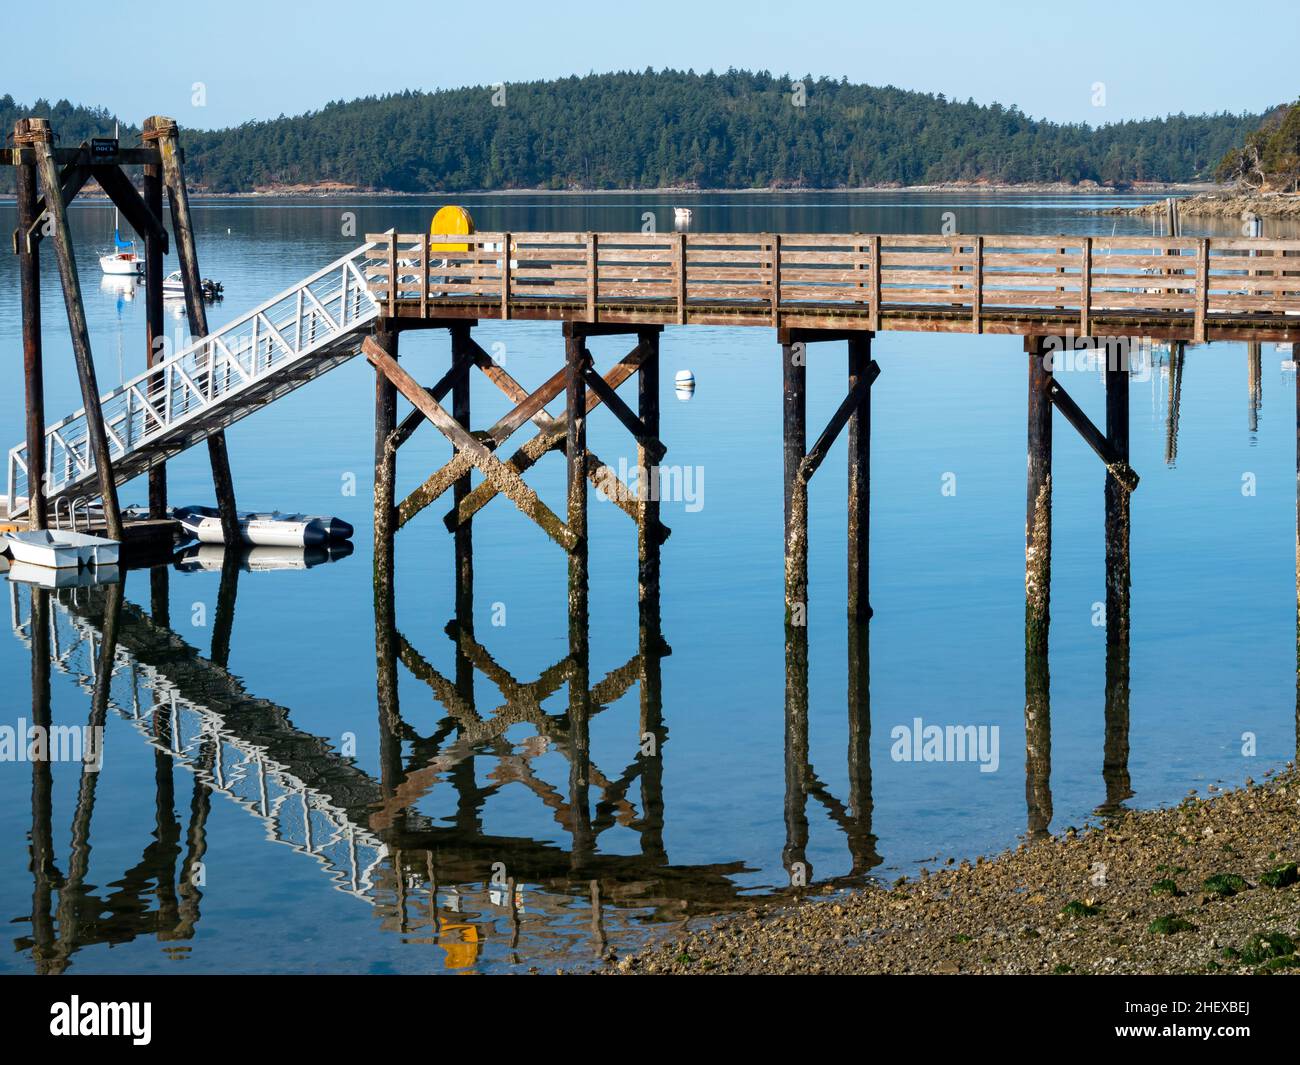 WA21084-00...WASHINGTON - Private dock and its reflection at West Sound on Orcas Island. Stock Photo